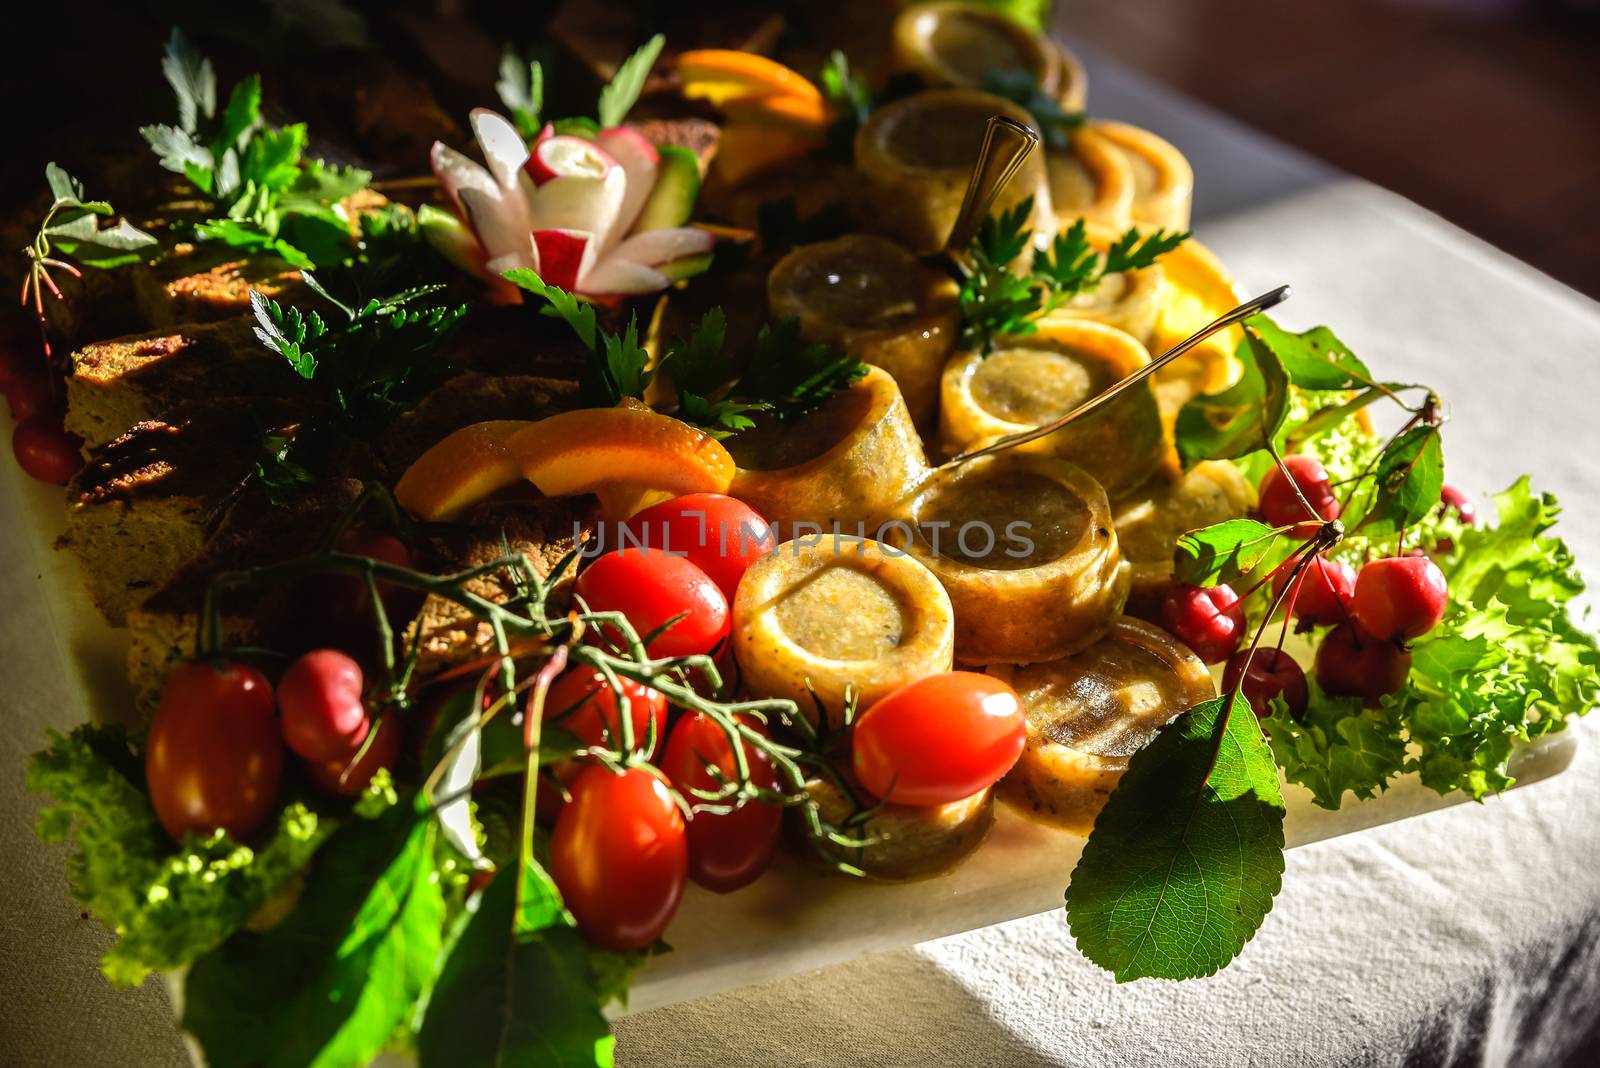 A widely varied food with coctail sticks on wooden plate, harsh sun light.